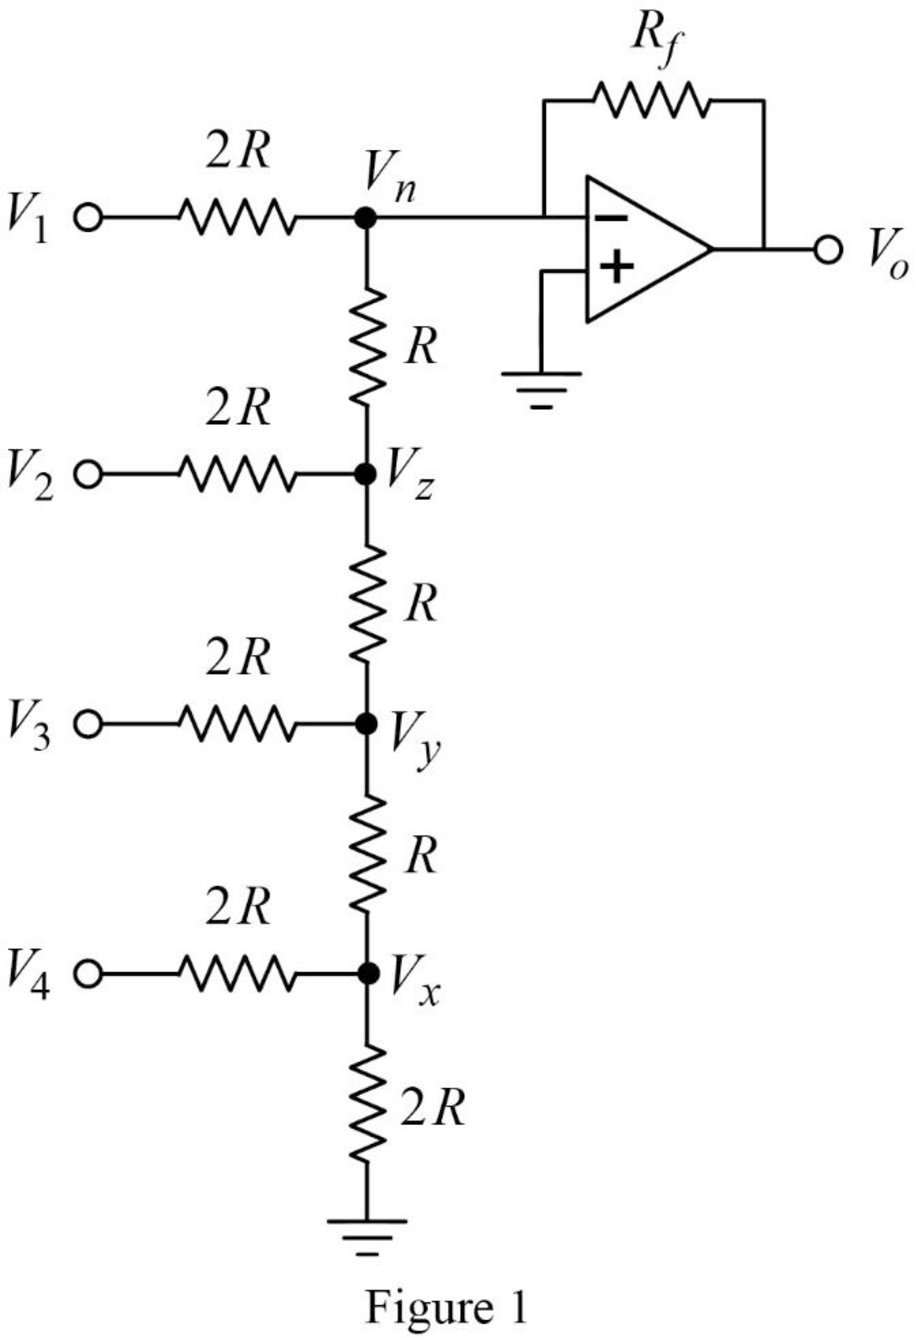 Fundamentals of Electric Circuits, Chapter 5, Problem 84P 